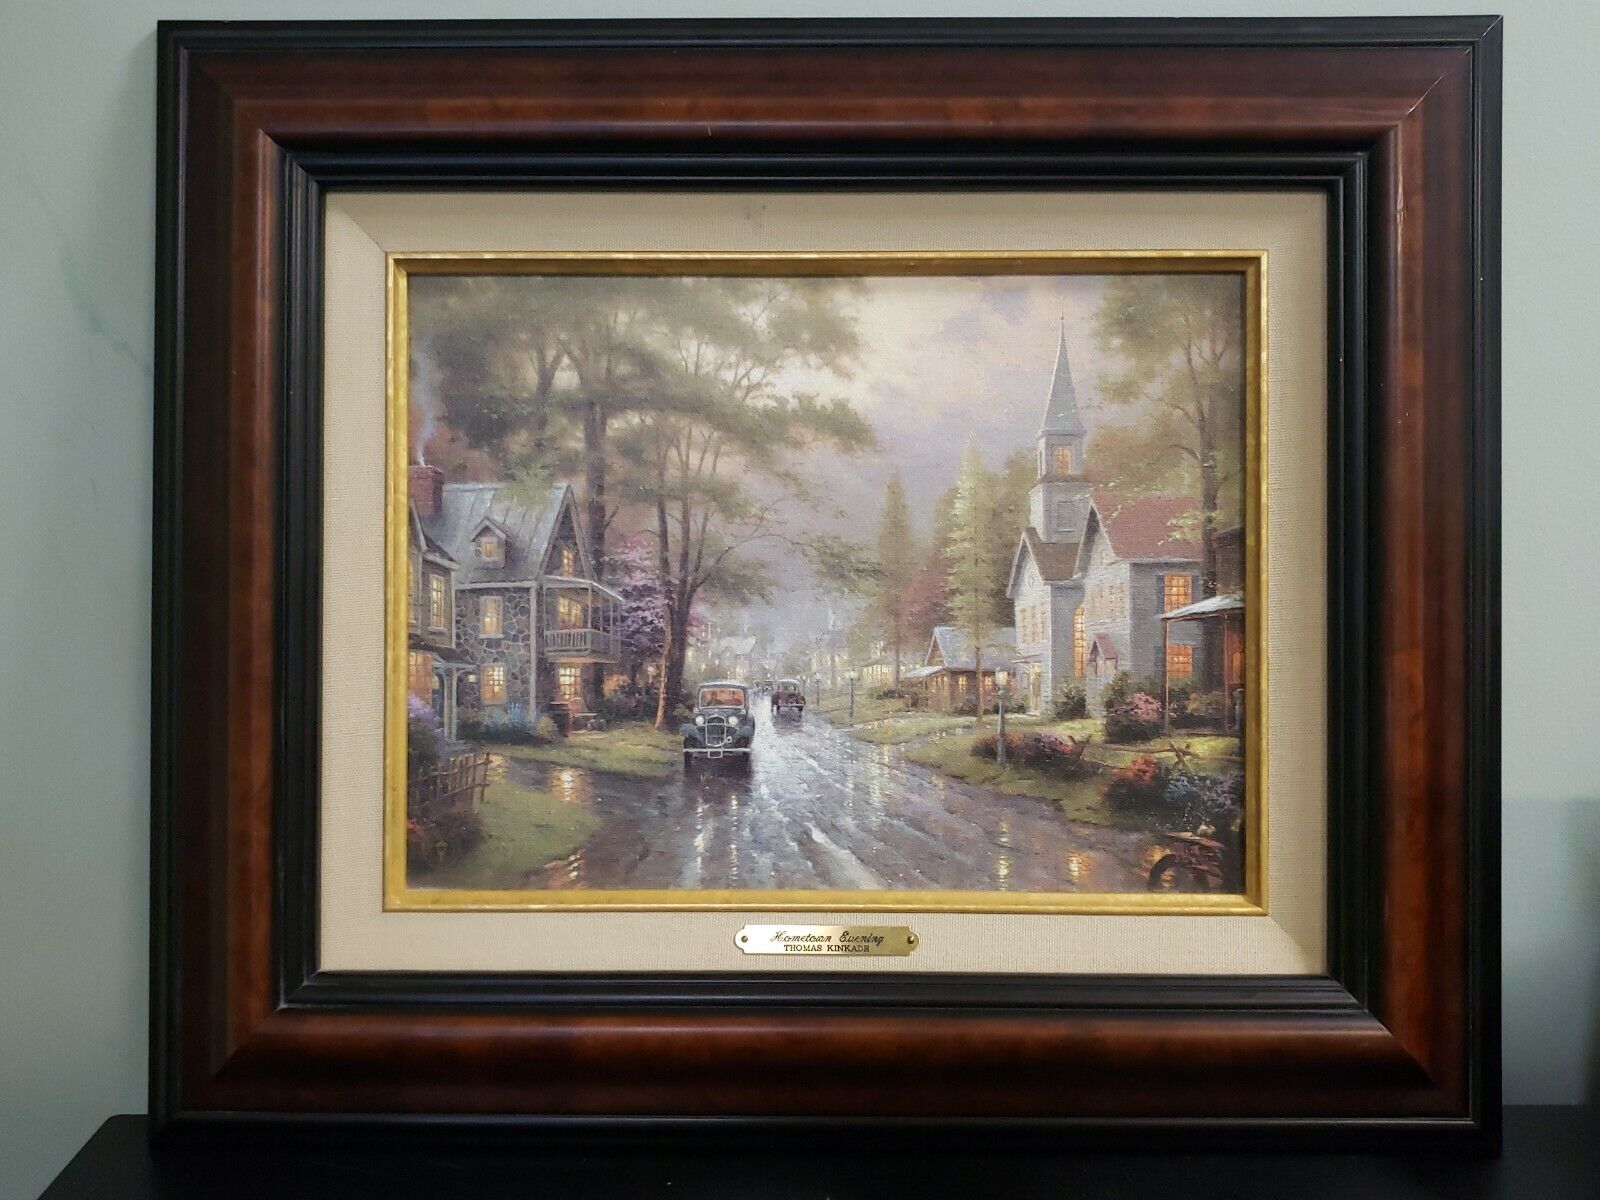 Hometown Evening Thomas Kinkade Painting Certificate Of Authenticity Shown